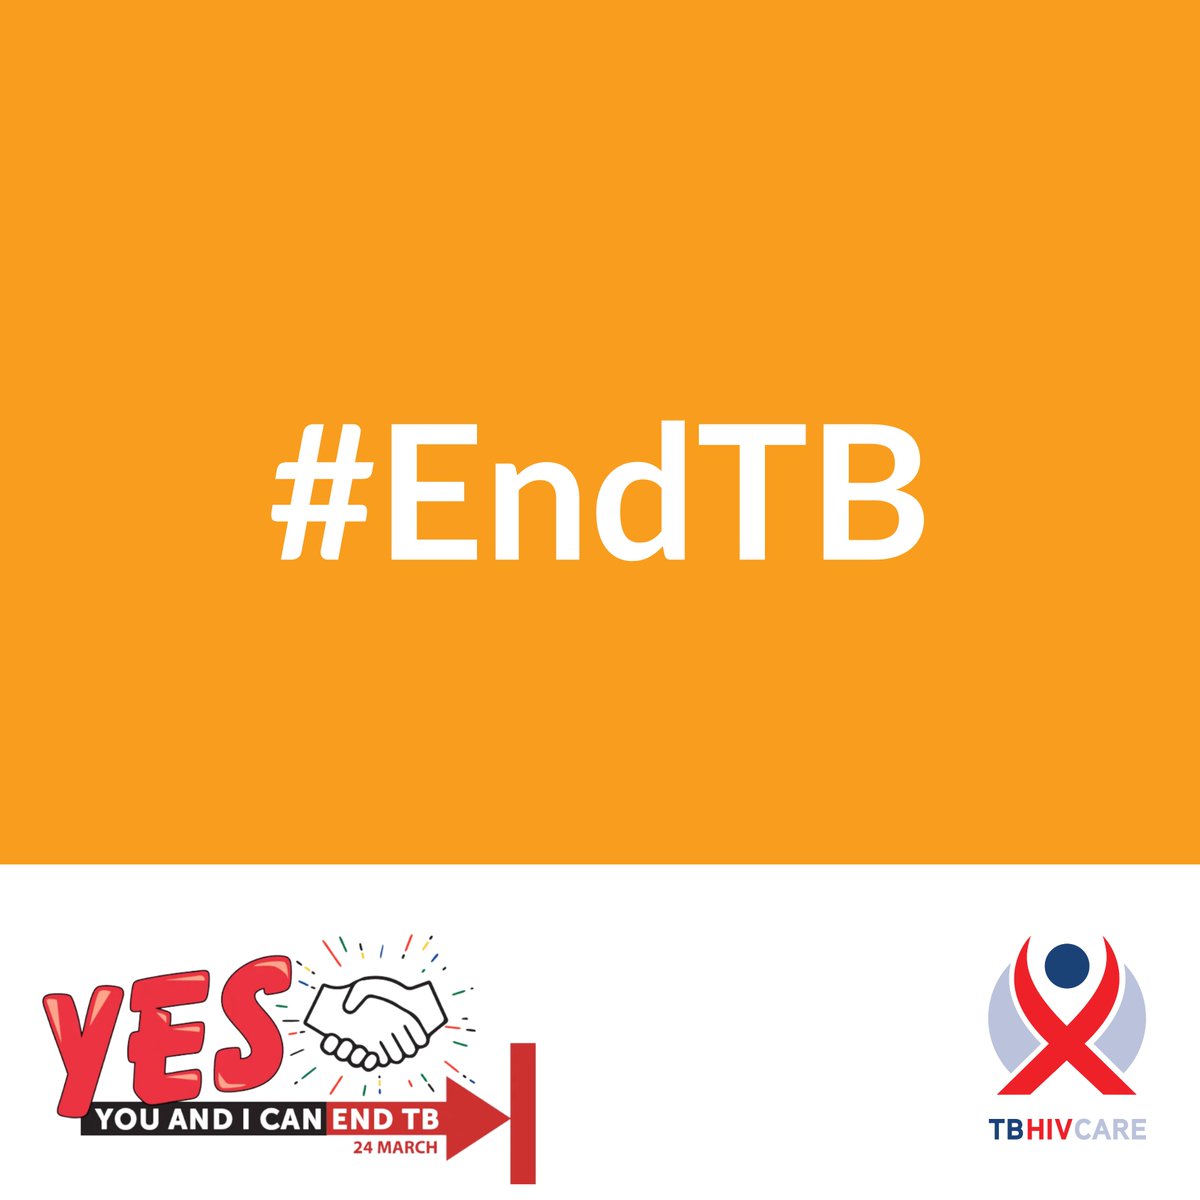 Stigma remains a massive barrier in the prevention and treatment of TB. We can #EndTB by identifying and overcoming stigma, discrimination and other gender and human rights barriers. Together we can #EndTB. #WorldTBDay @SA_AIDSCOUNCIL @StopTB @HealthZA